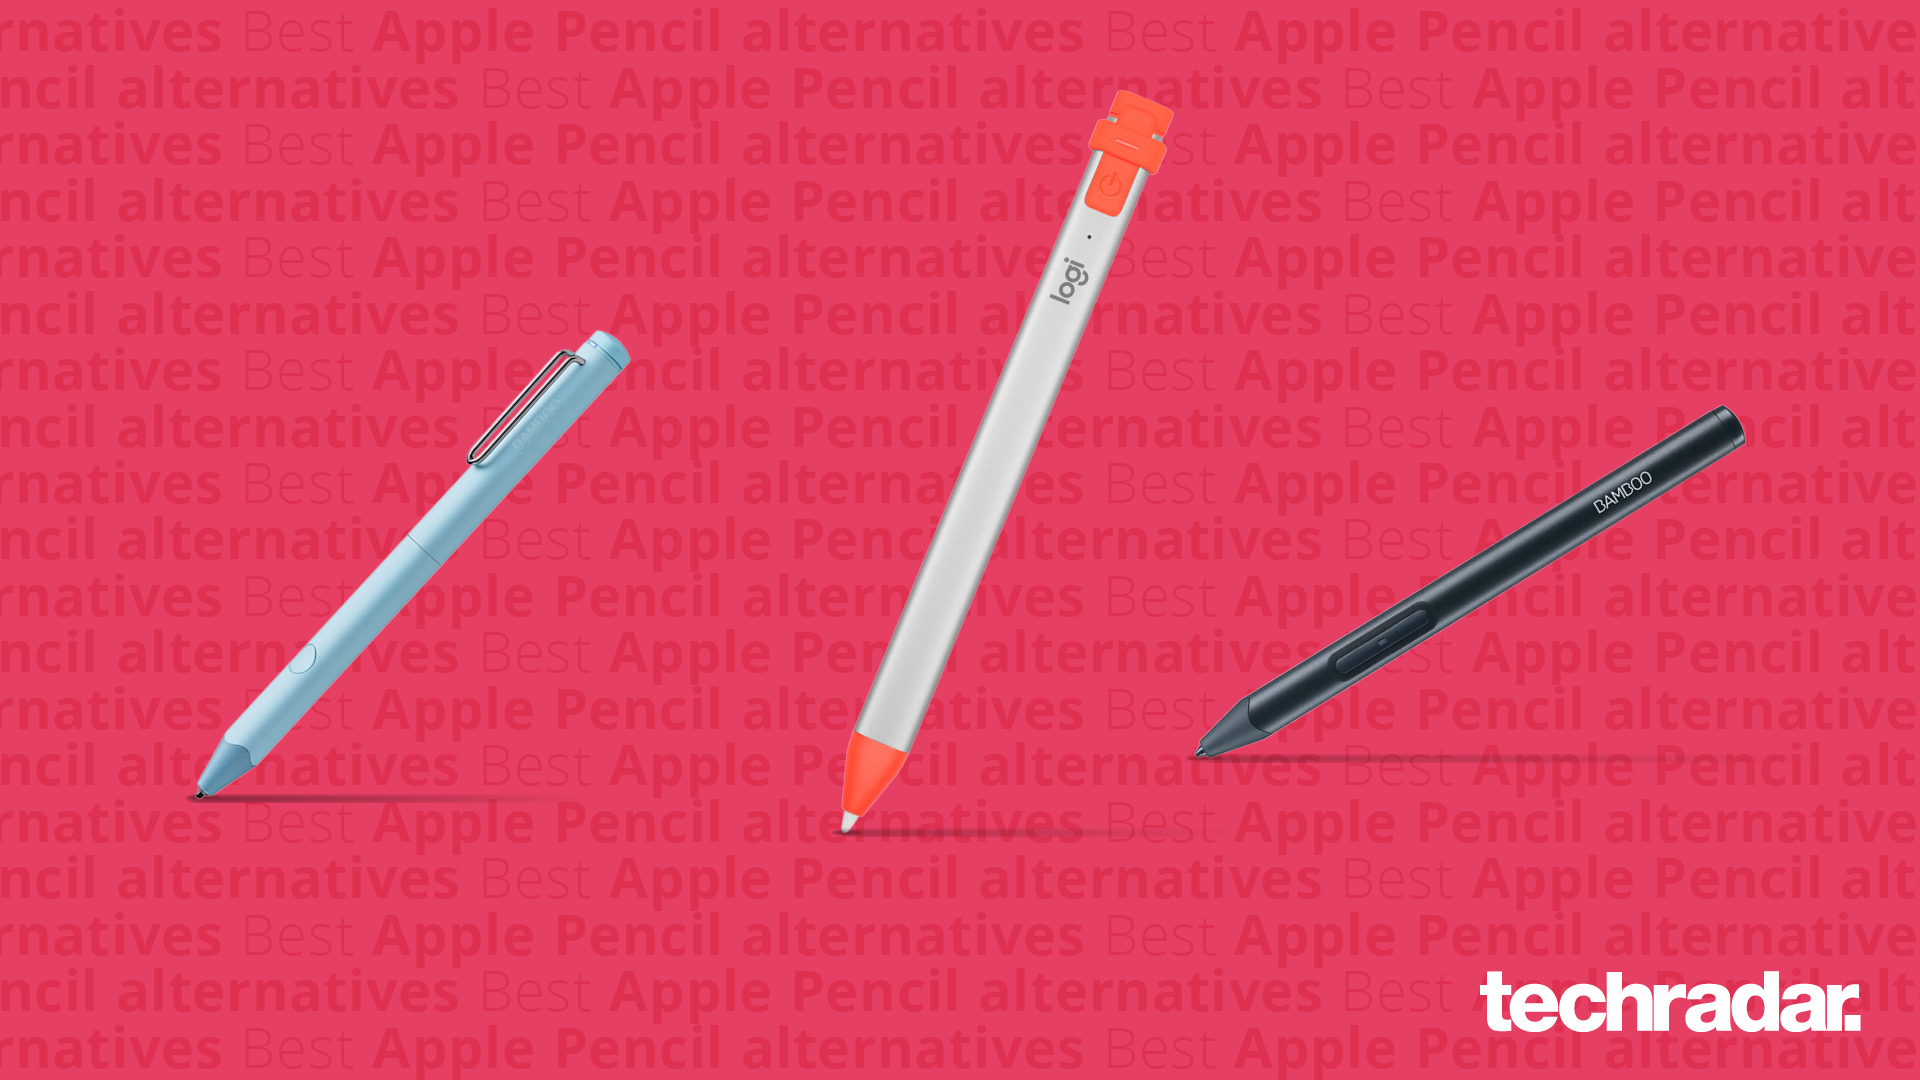 Best Apple Pencil alternatives 2022: what stylus is for you?